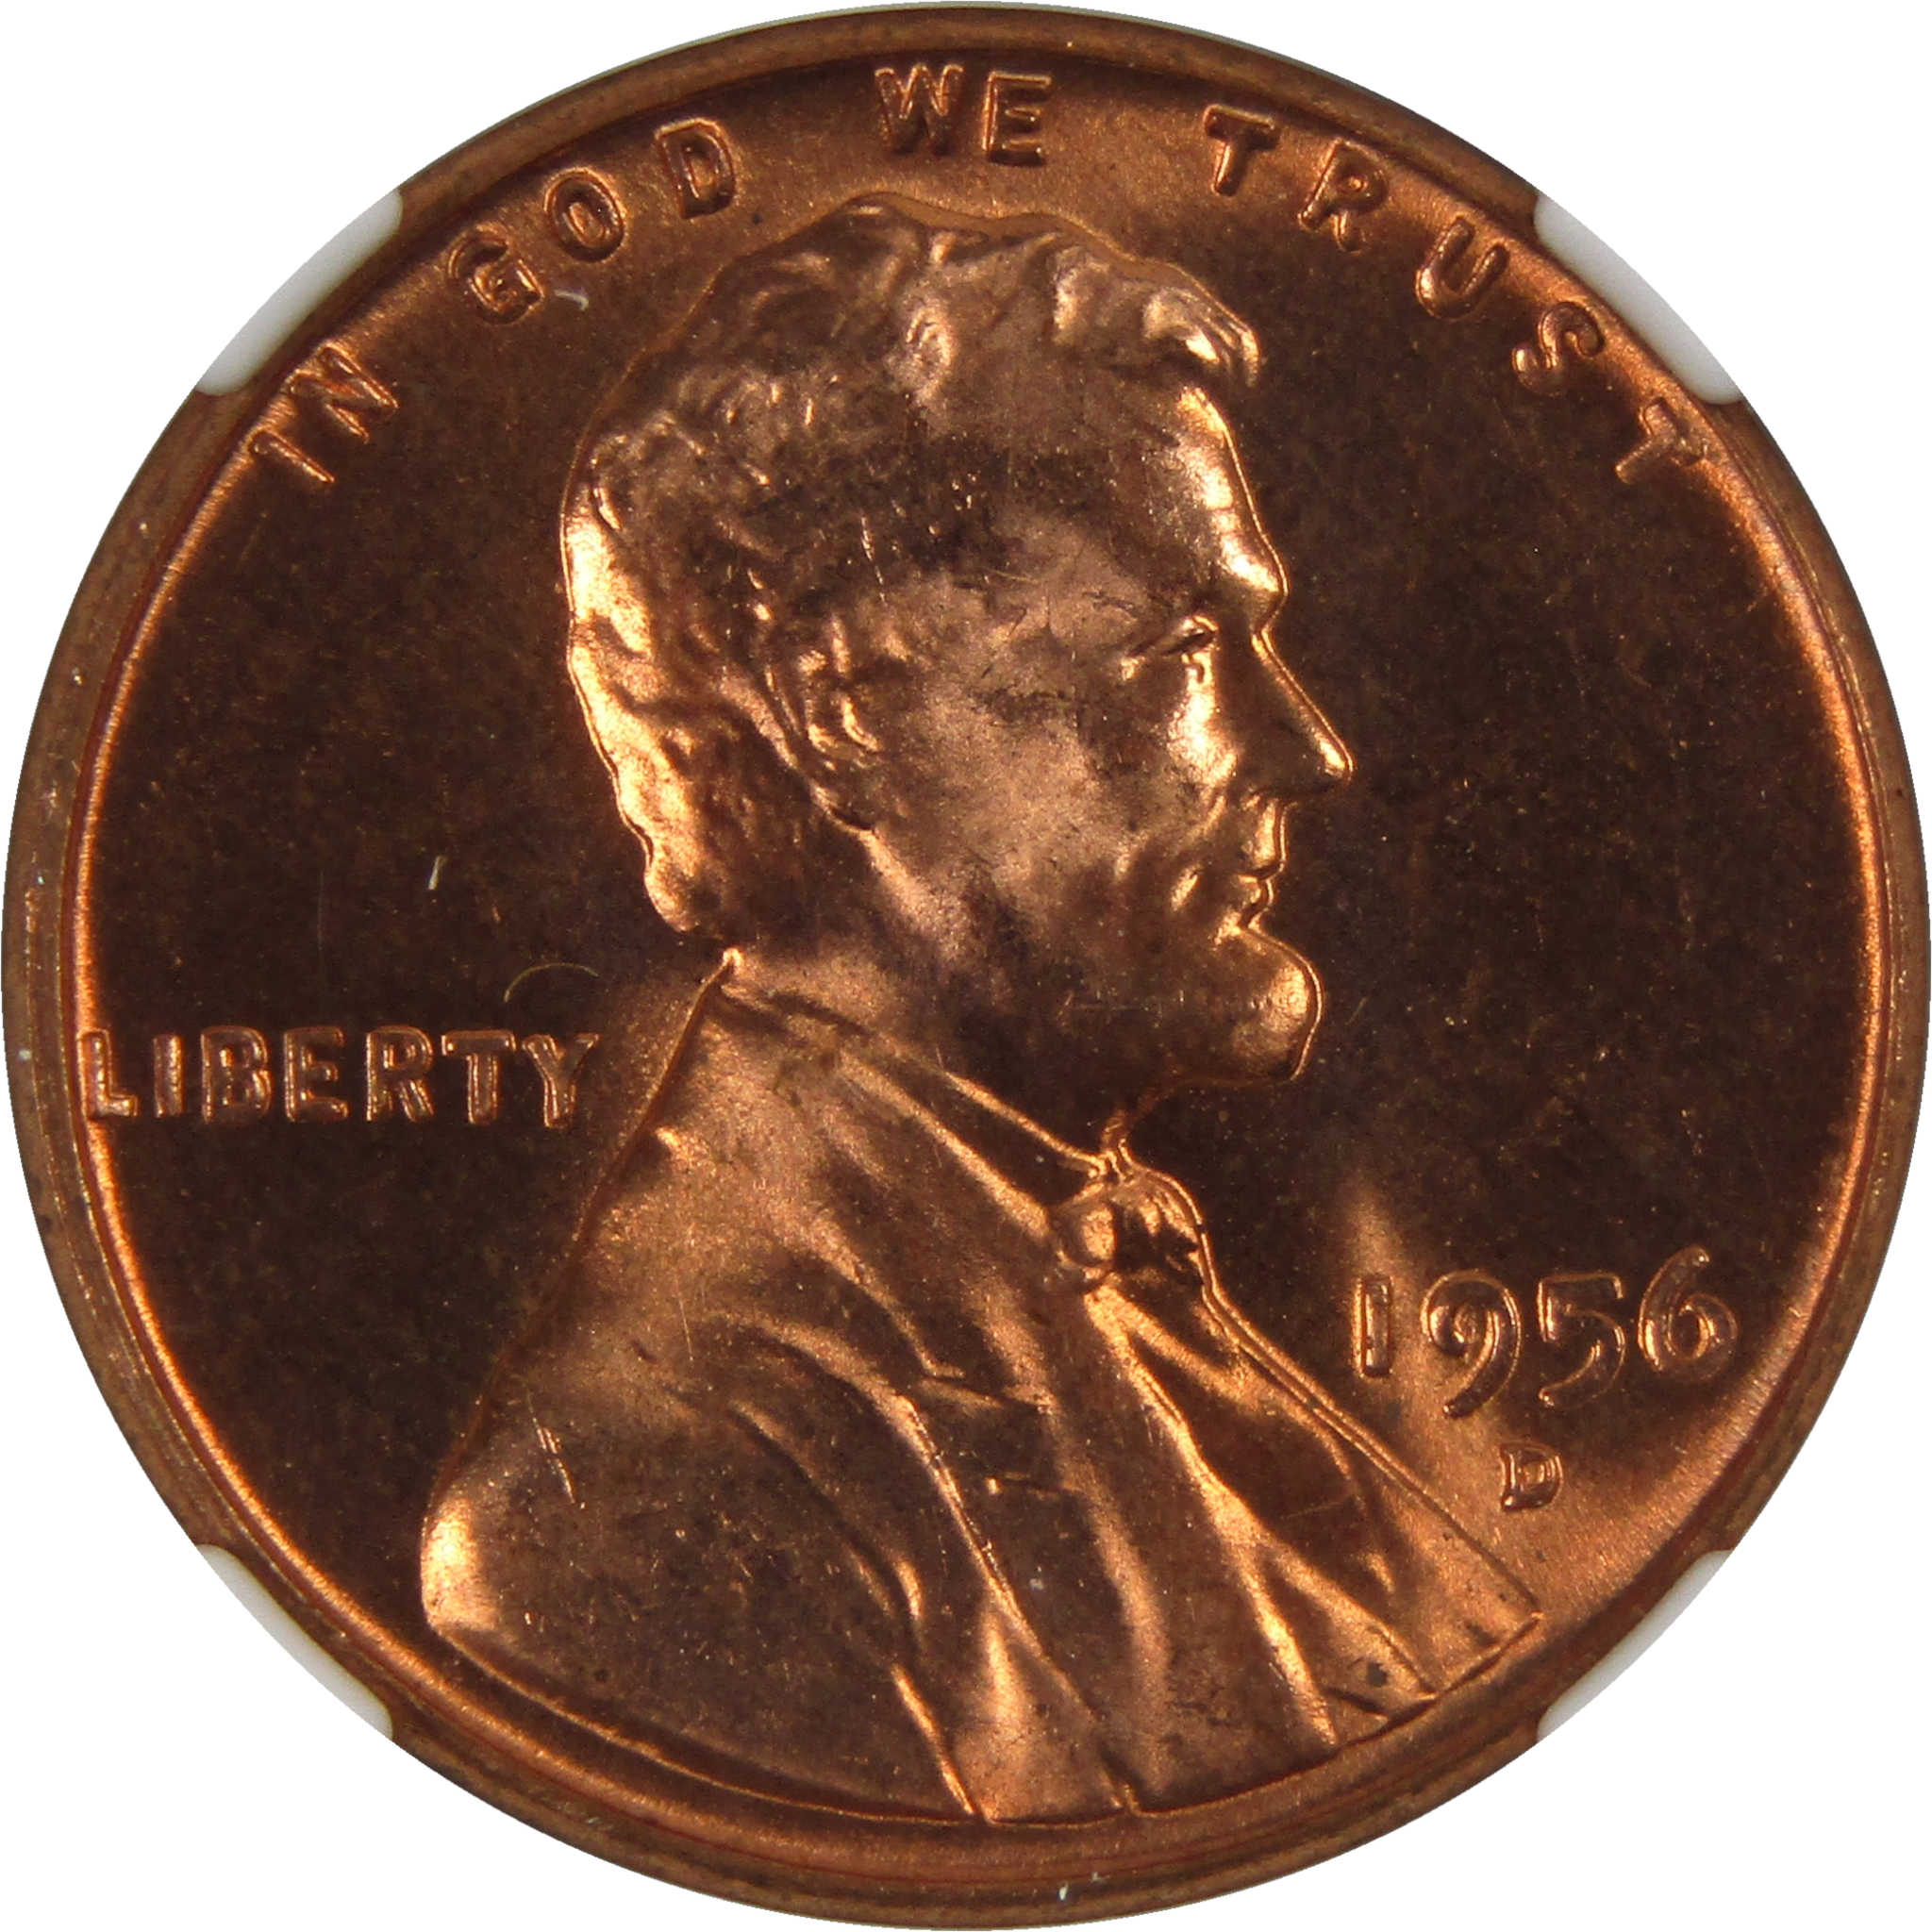 1956 D Lincoln Wheat Cent MS 66 RD NGC Penny Uncirculated SKU:I3671